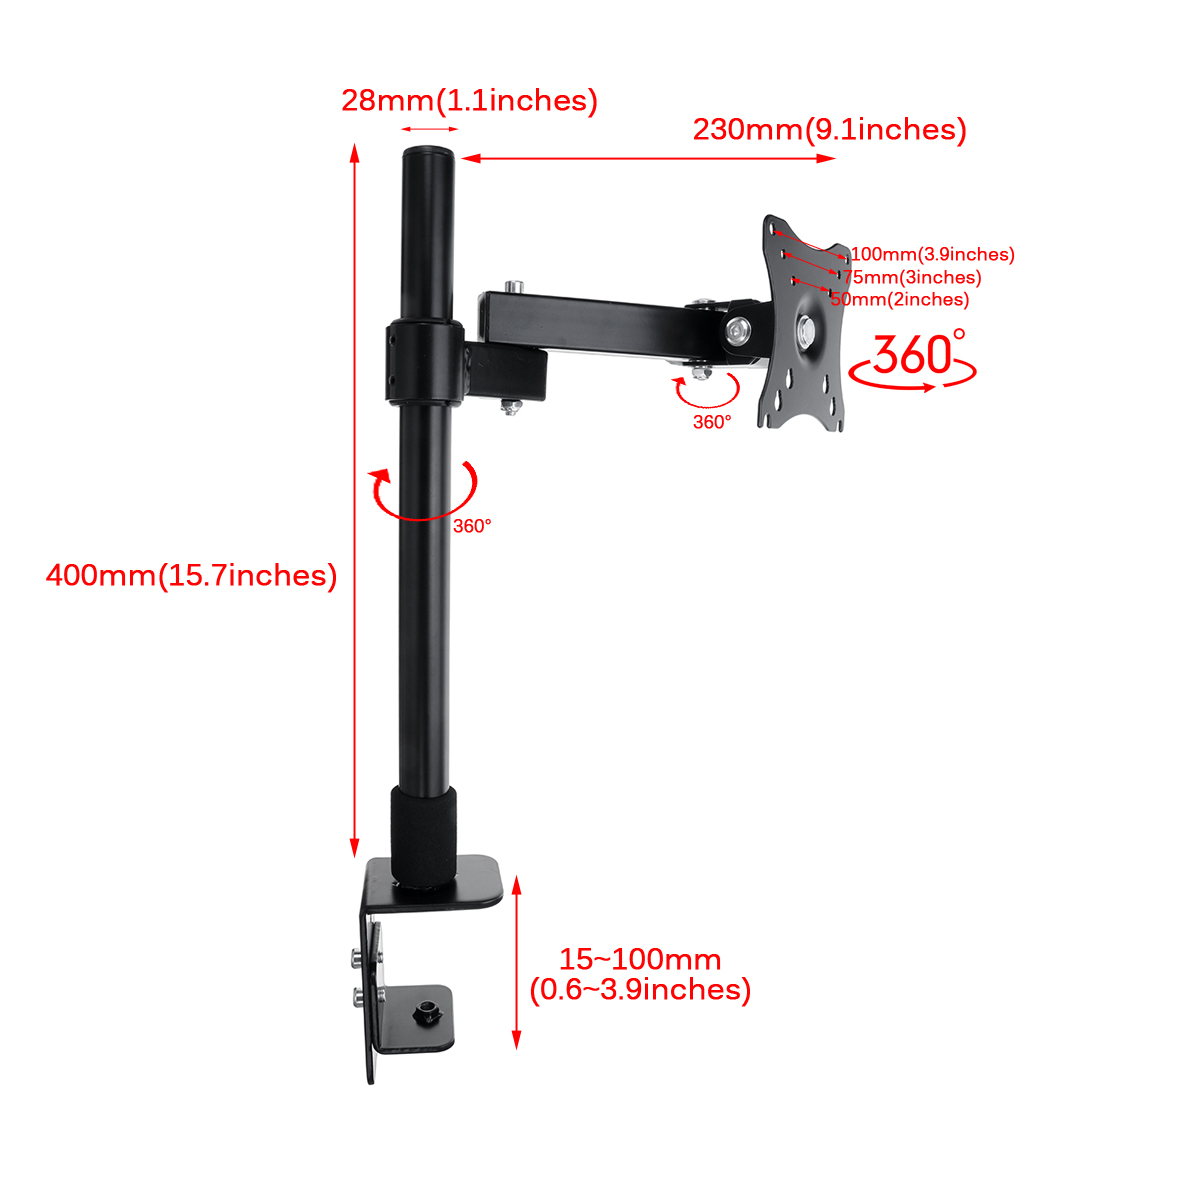 Single-Arm-Desk-Mount-LCD-Computer-Monitor-Bracket-Clamp-Stand-14-27-inch-Screen-TV-Bracket-1900409-2